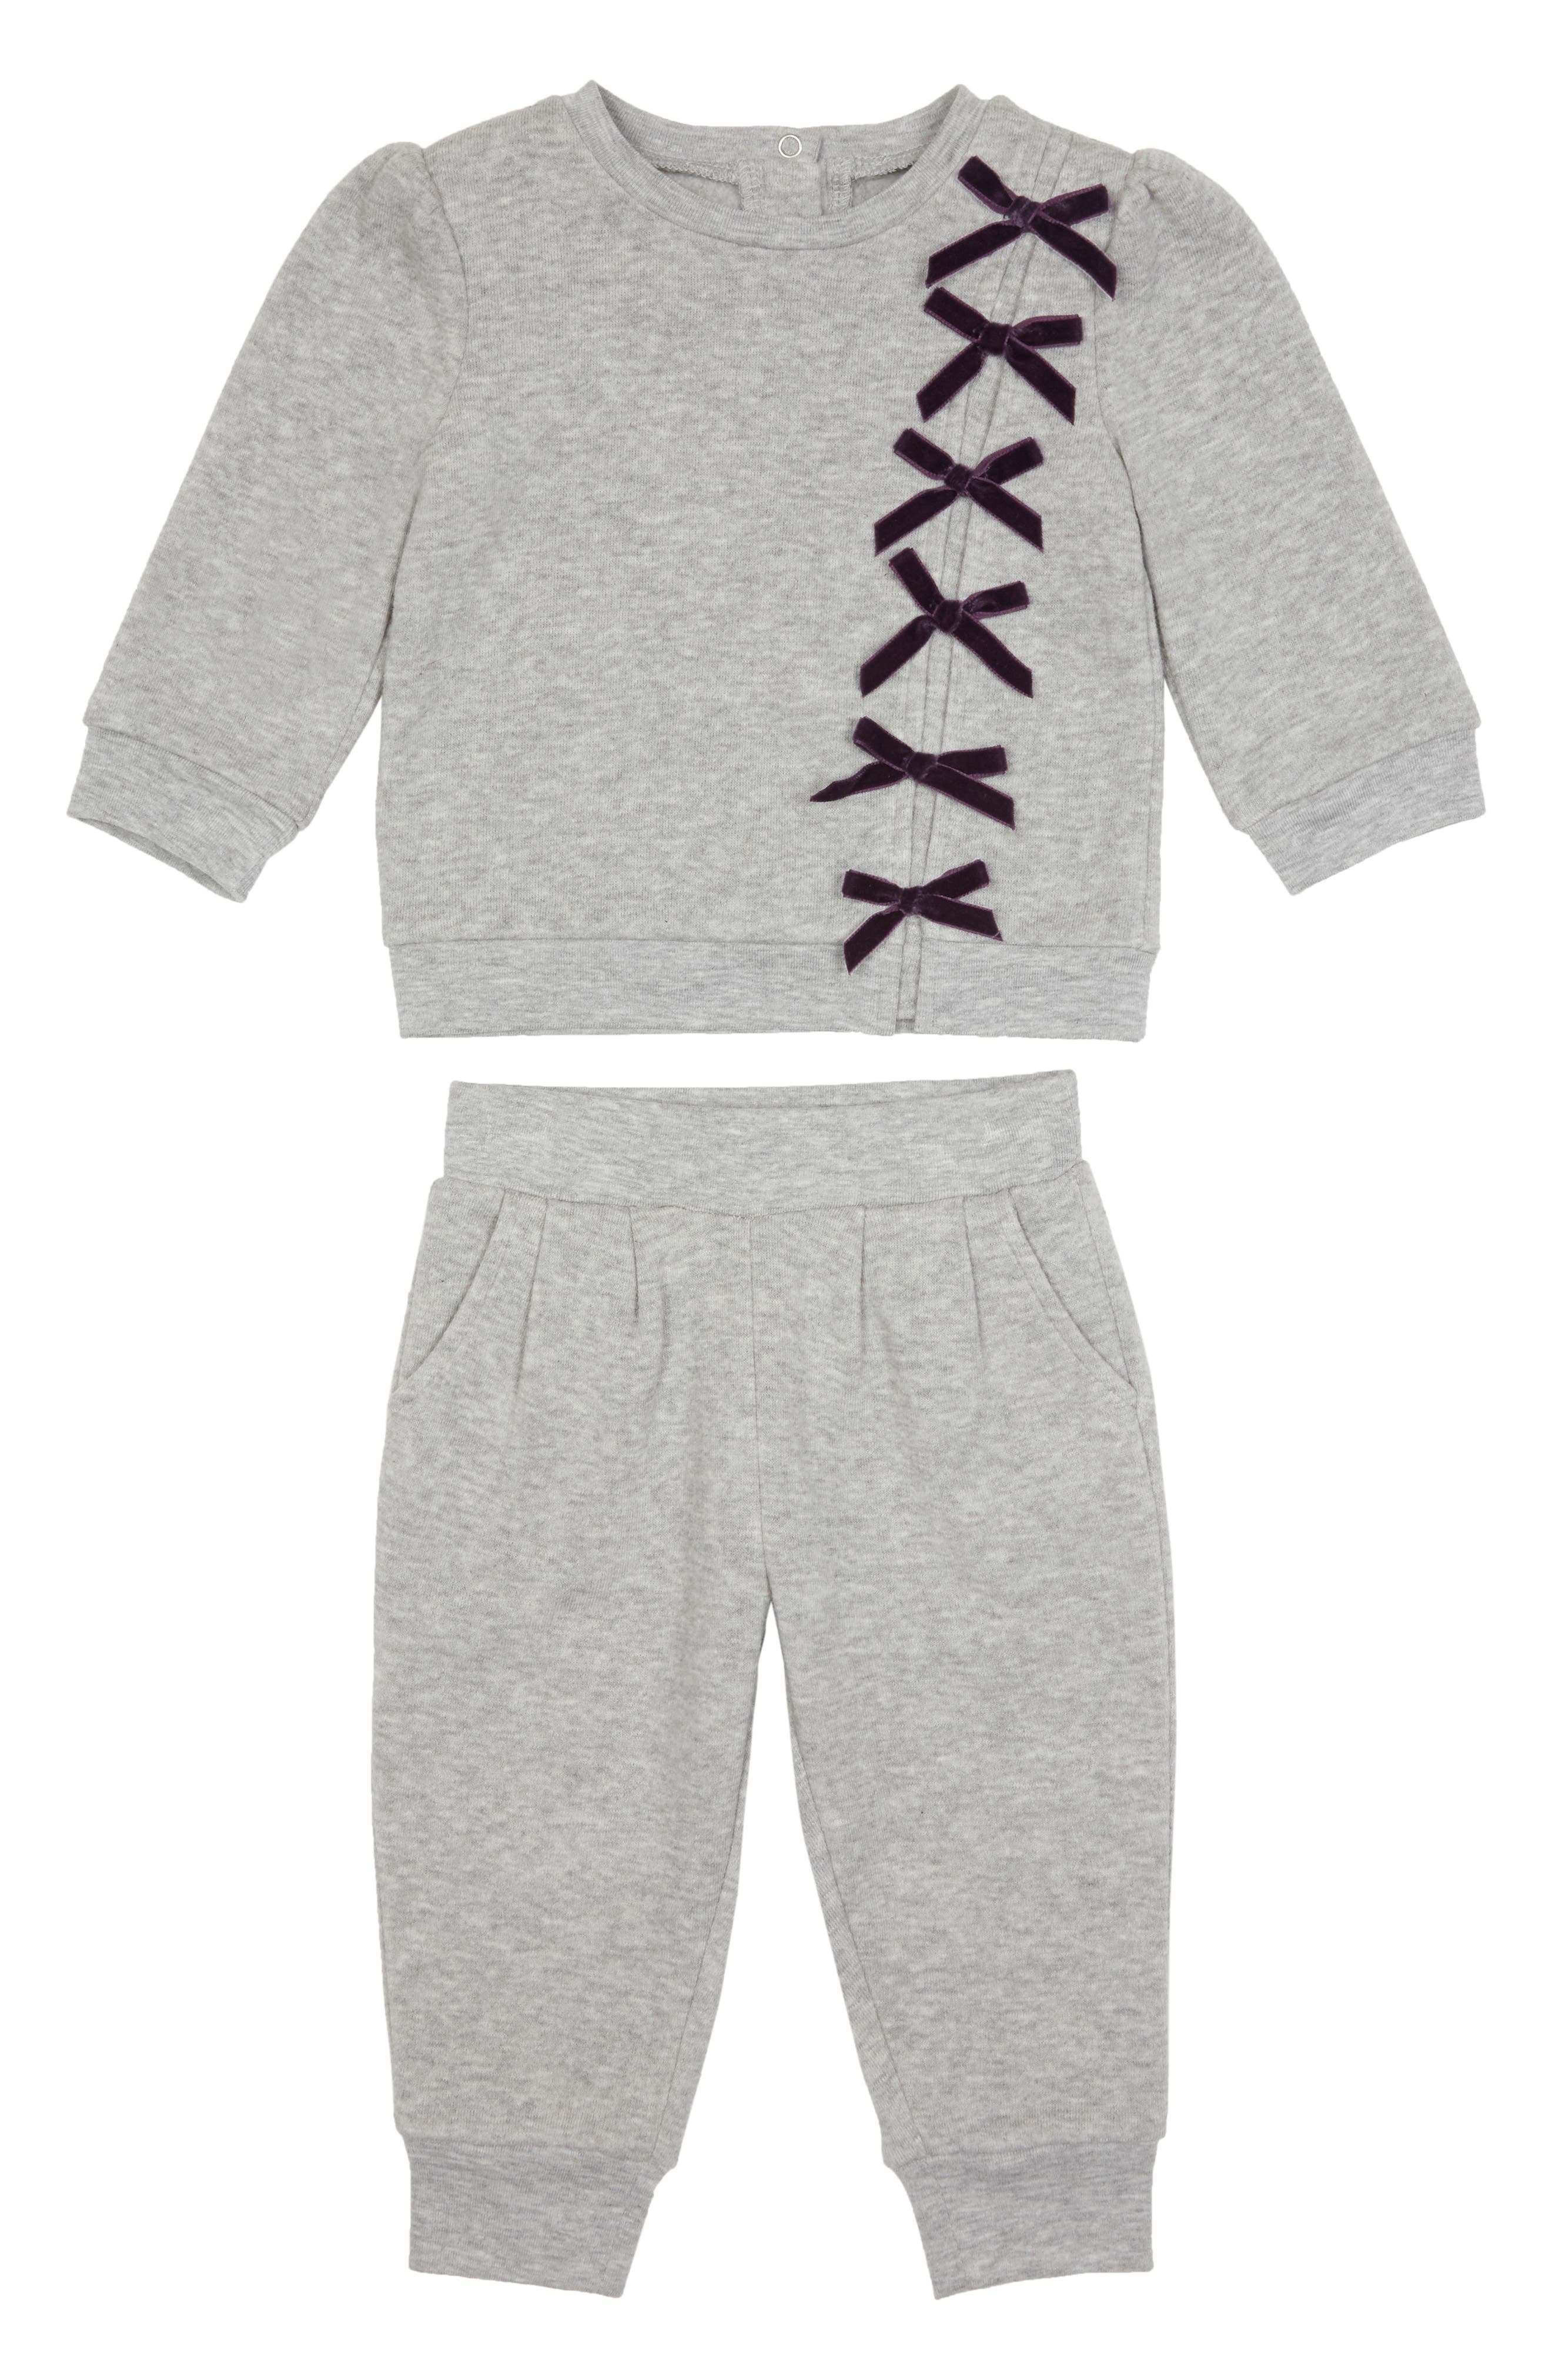 grey and pink polo sweatsuit